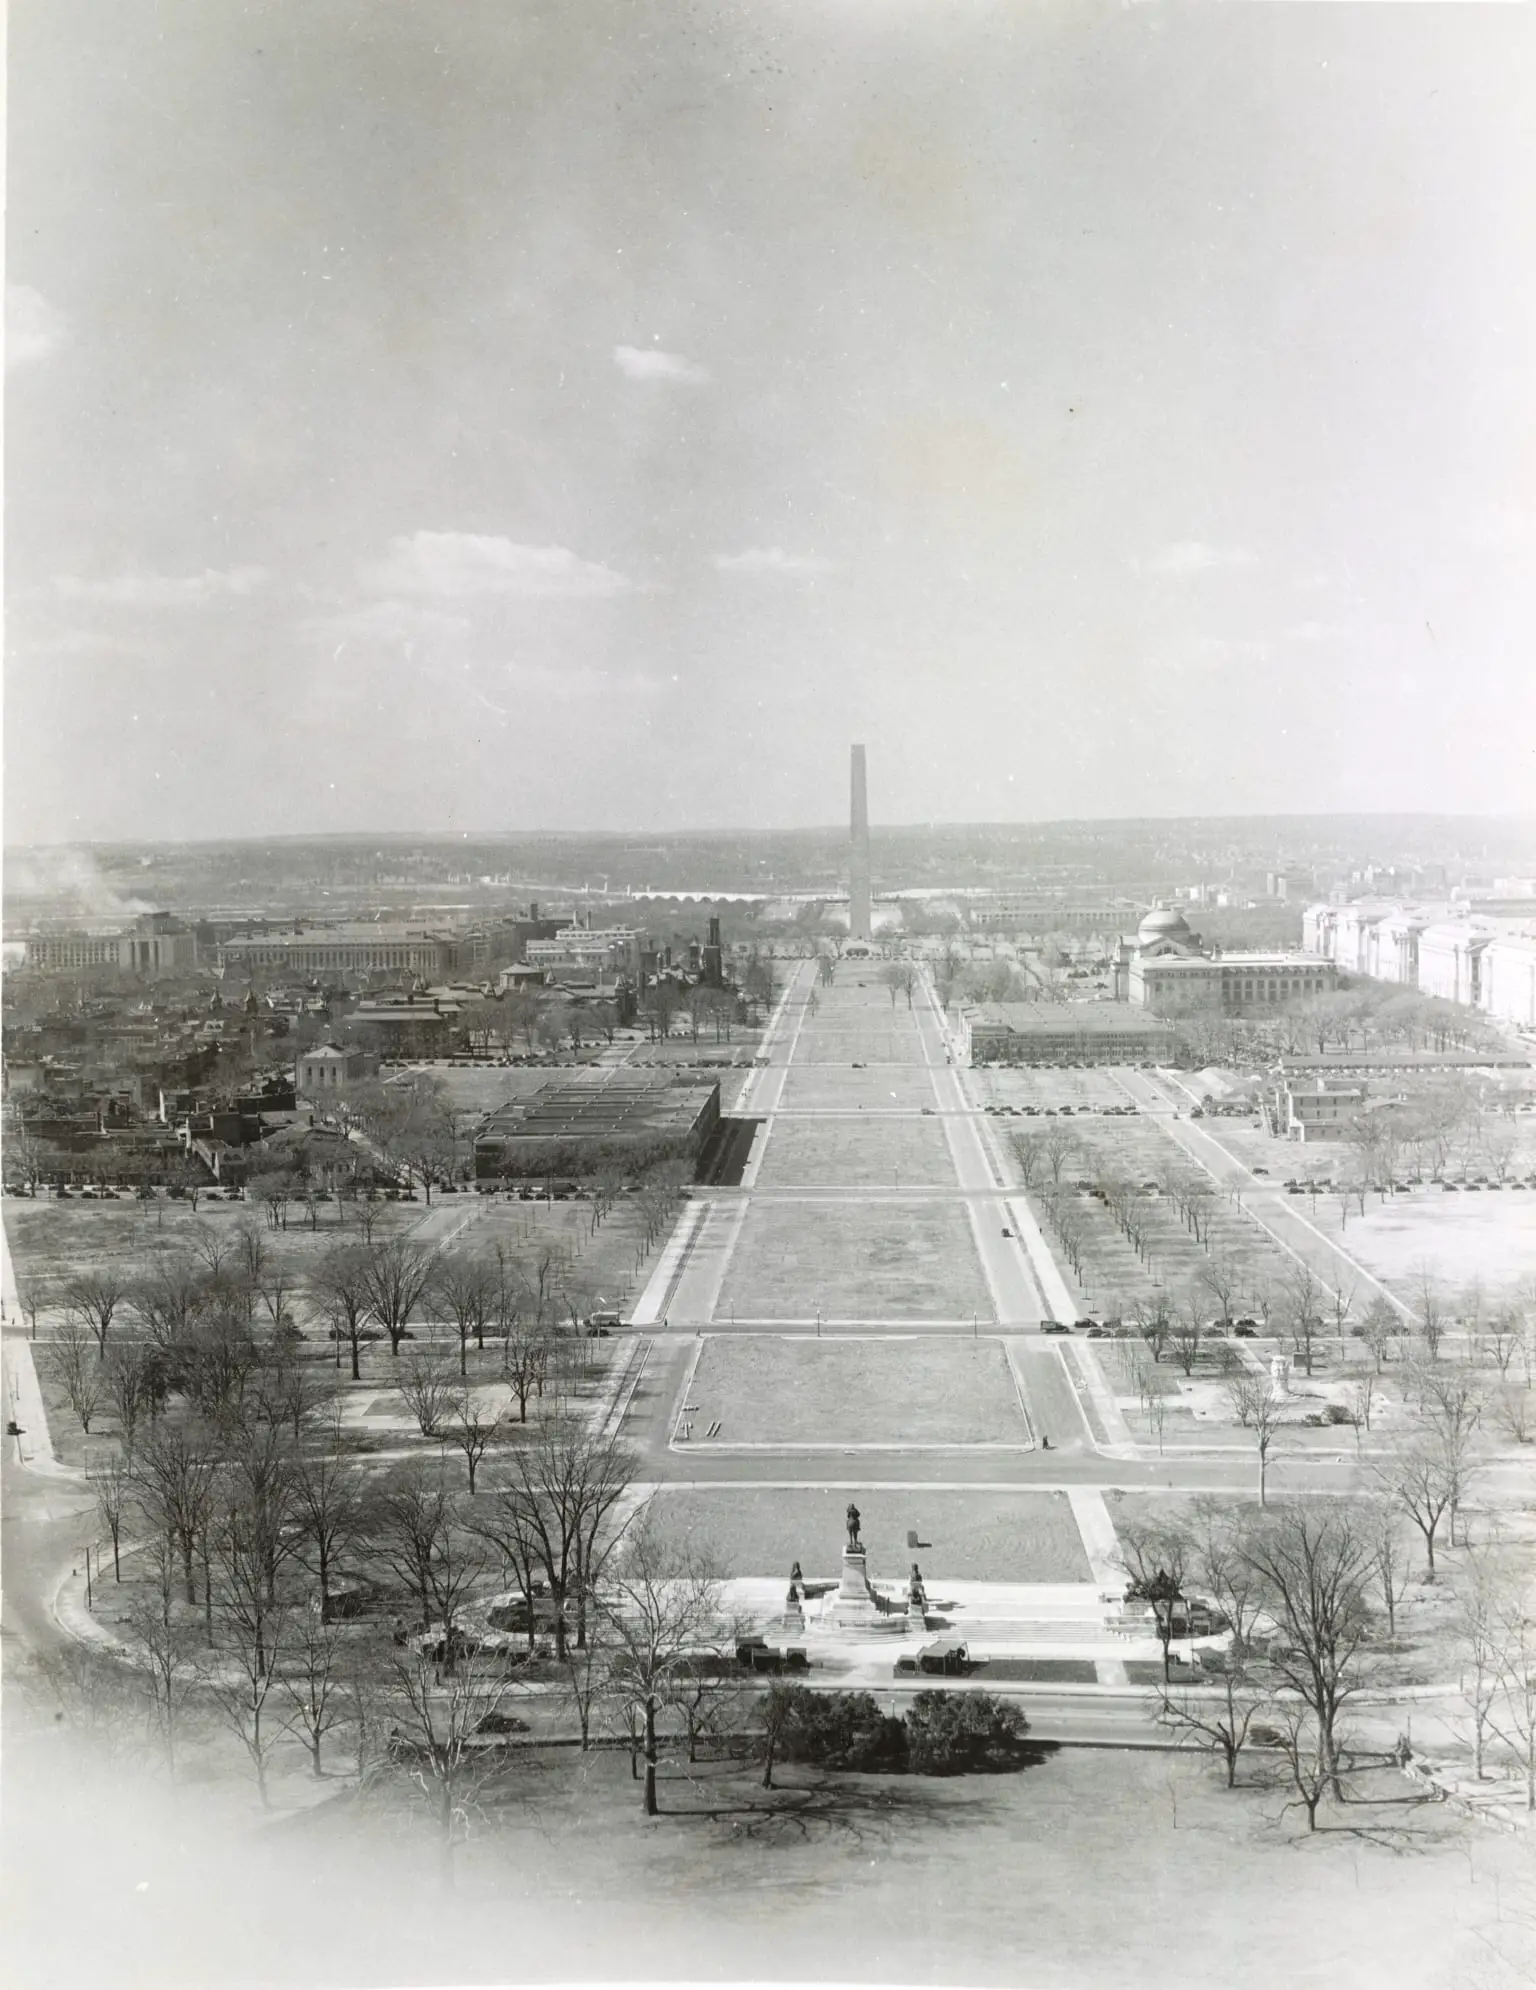 1936 view of the Mall